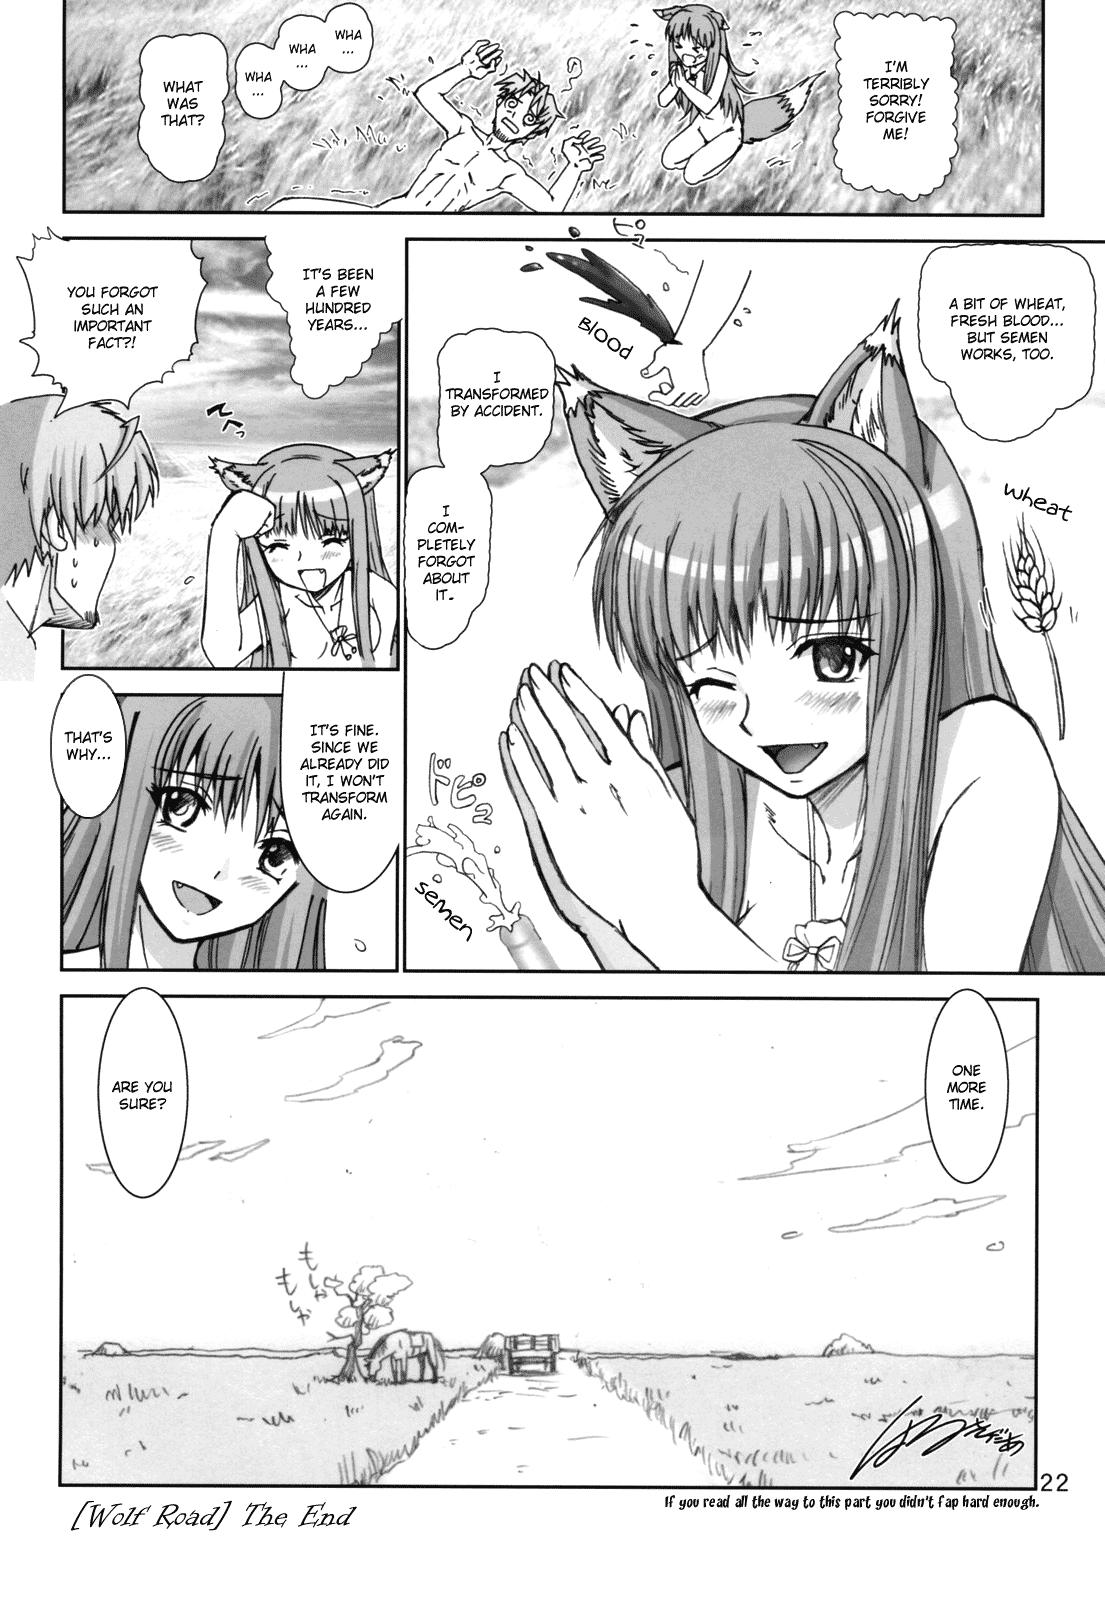 Porn Star Wolf Road - Spice and wolf Amateur Sex - Page 20